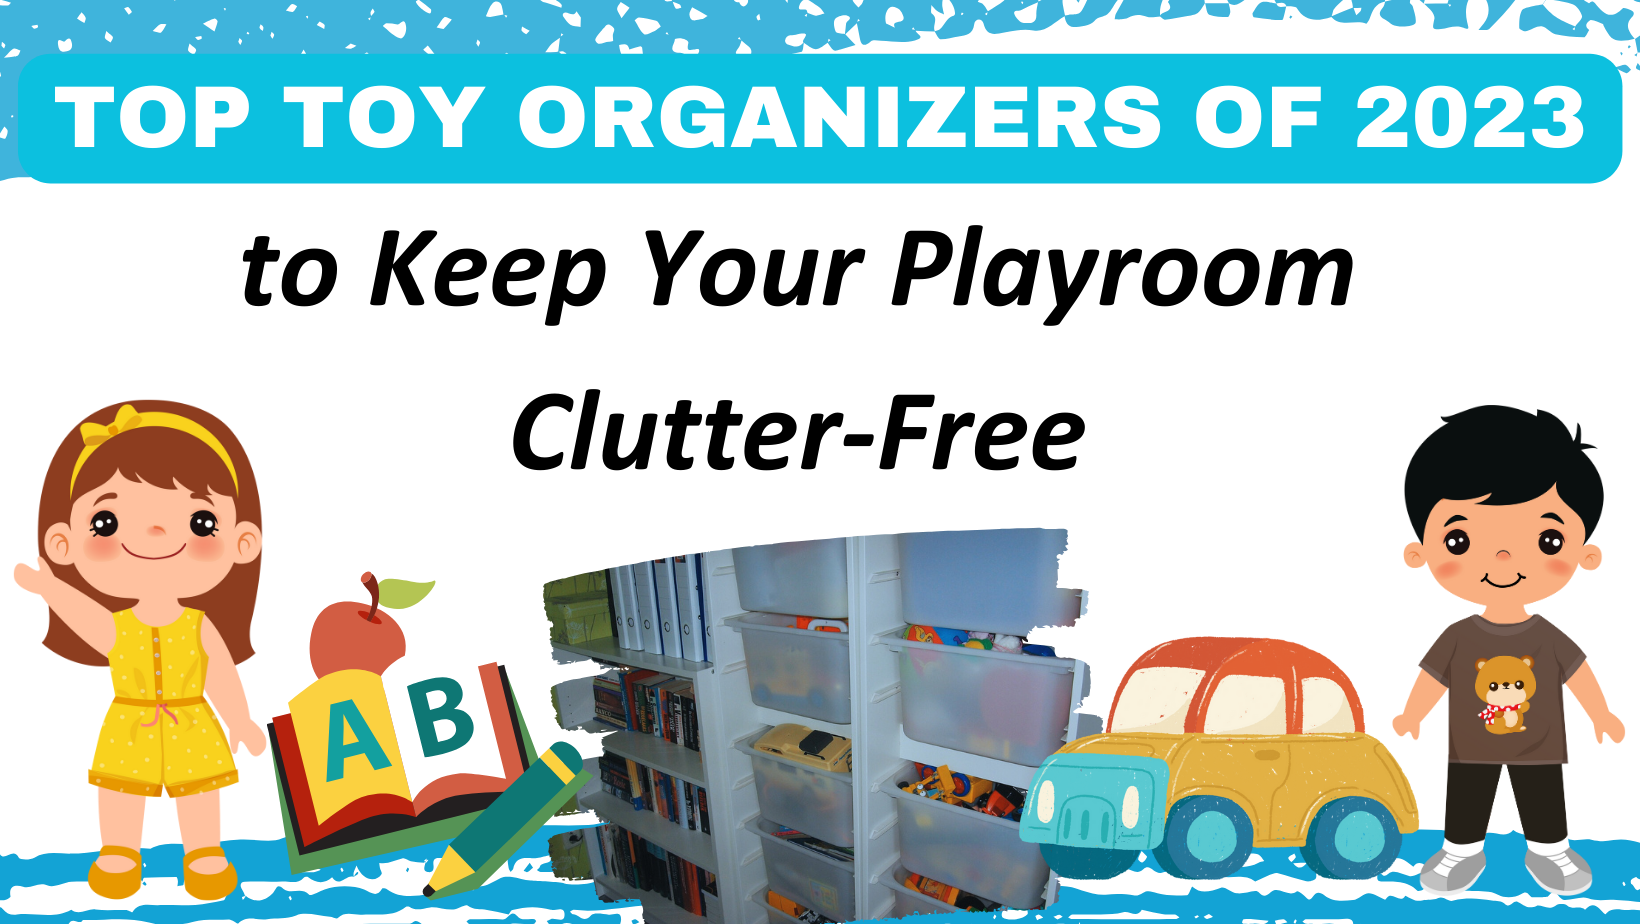 Top Toy Organizers of 2023 to Keep Your Playroom Clutter-Free